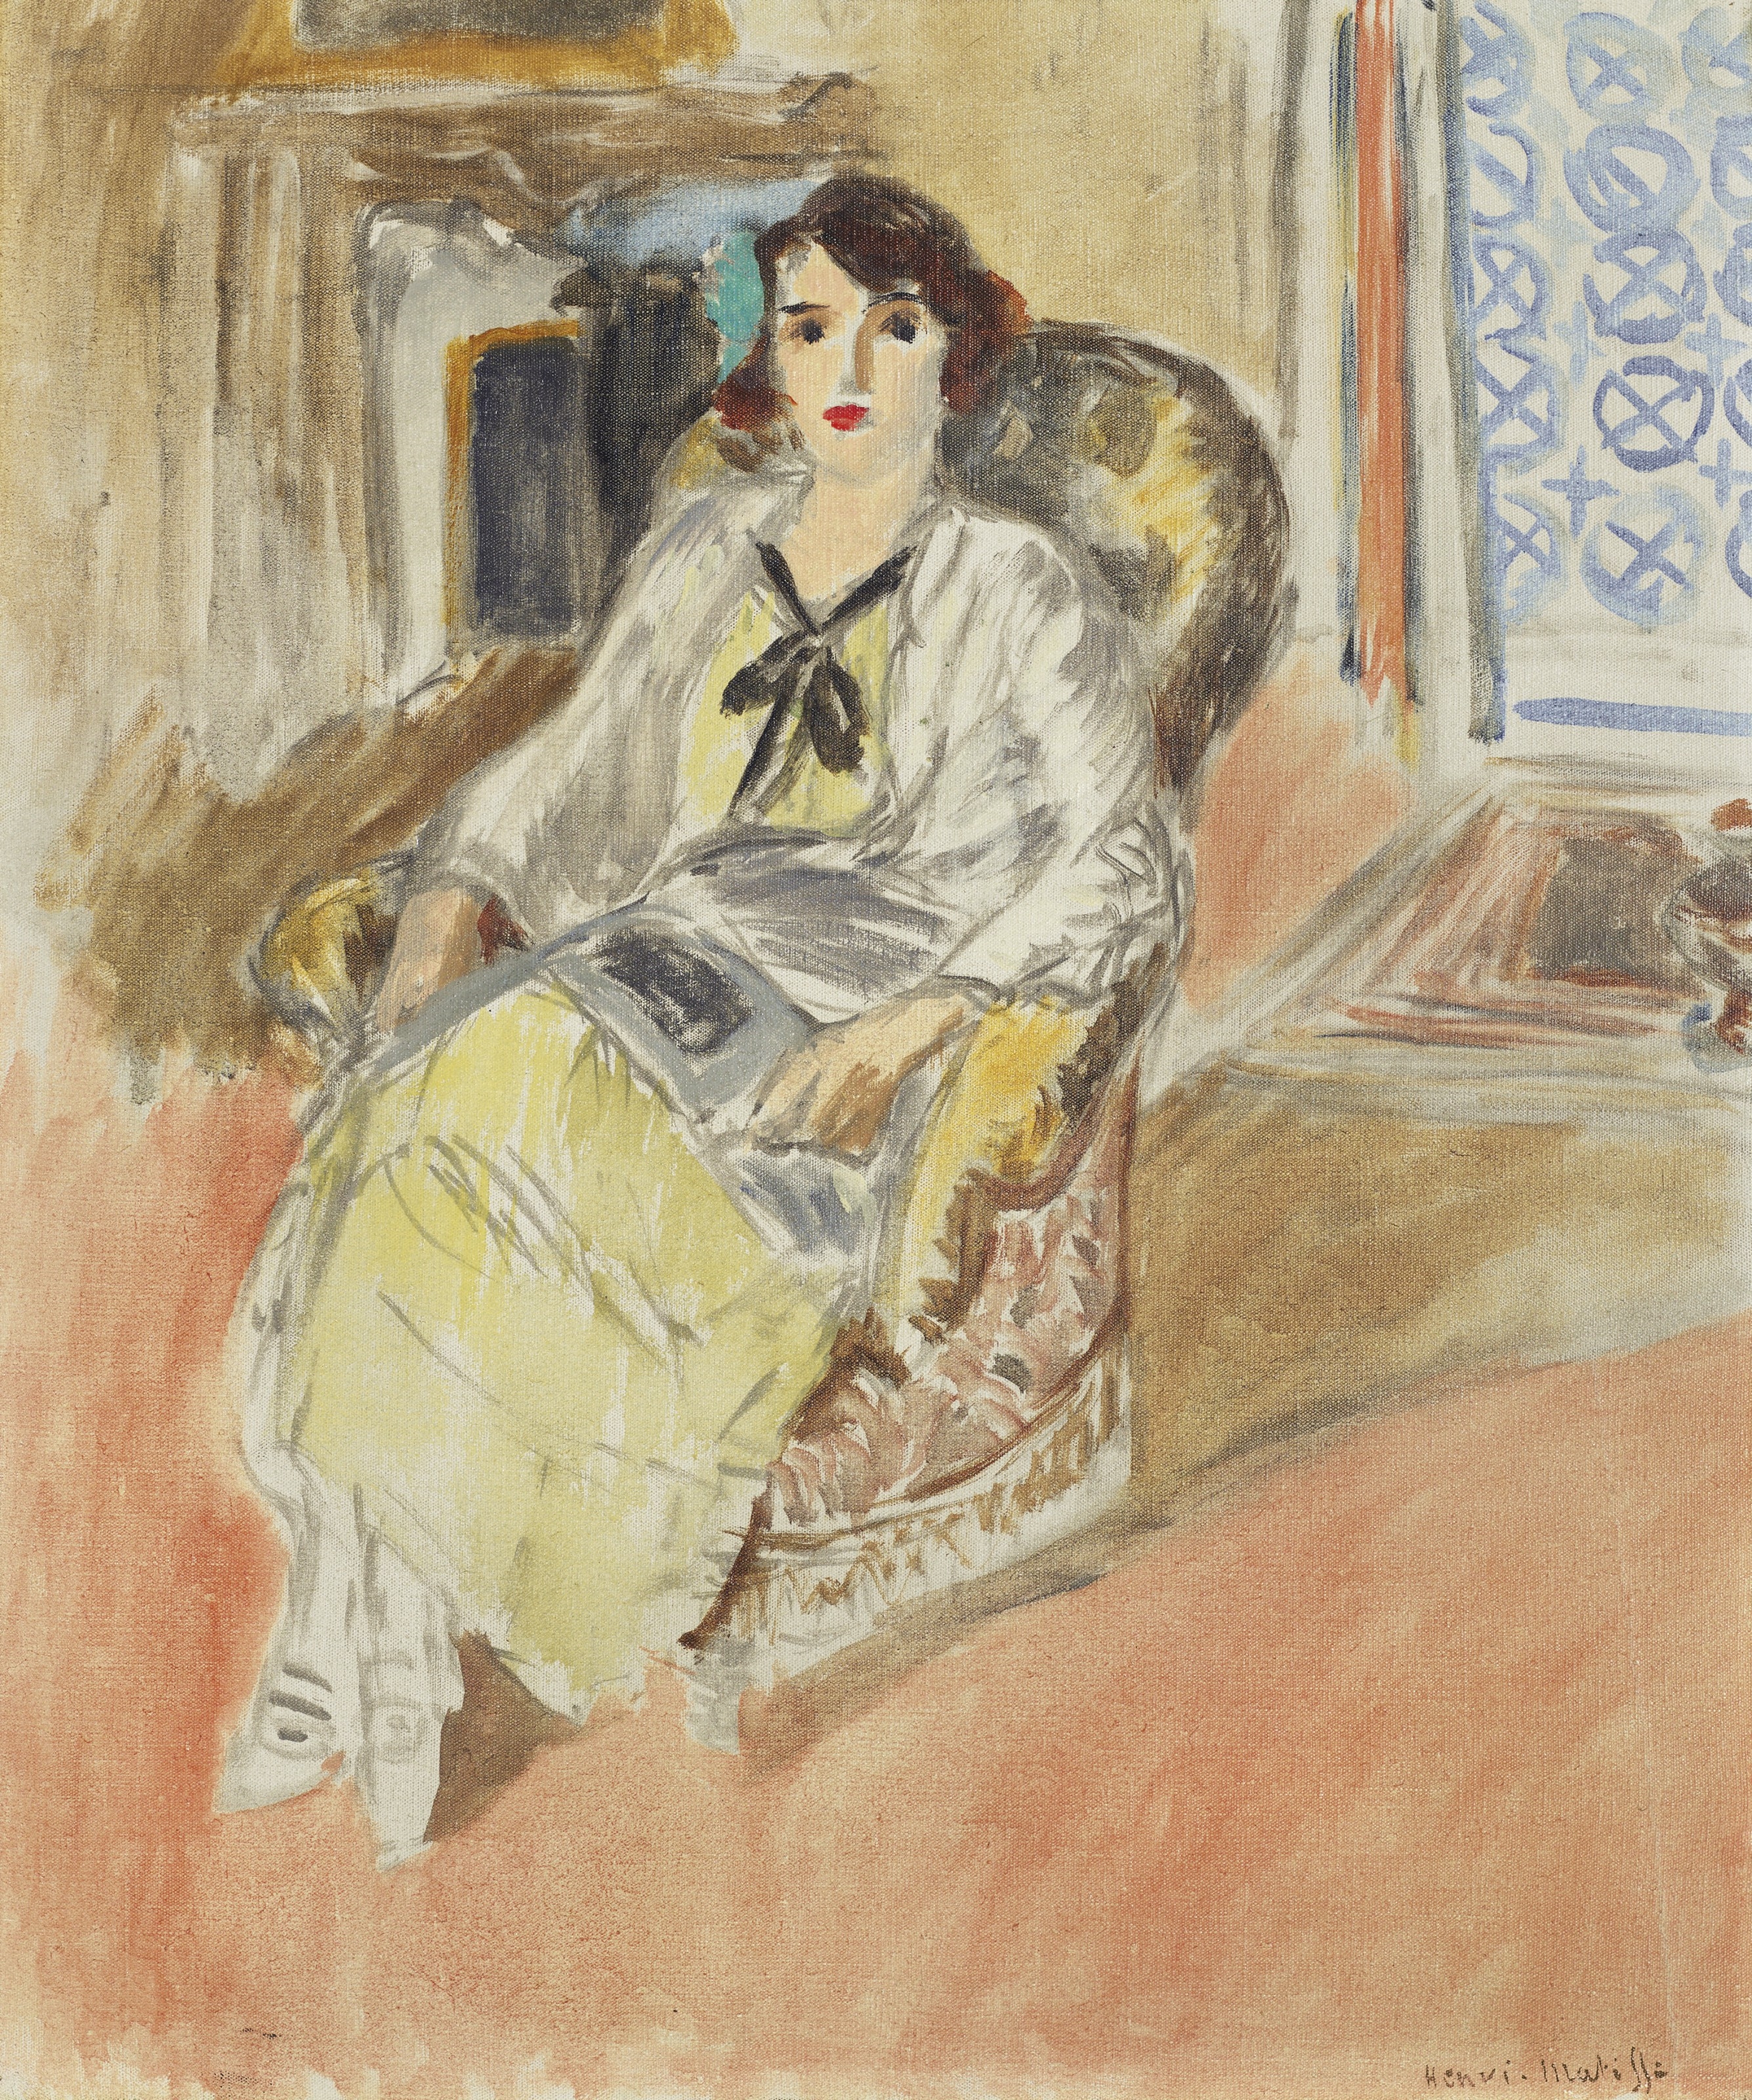 Artwork by Henri Matisse, Jeune fille assise, robe jaune, Made of oil on canvas